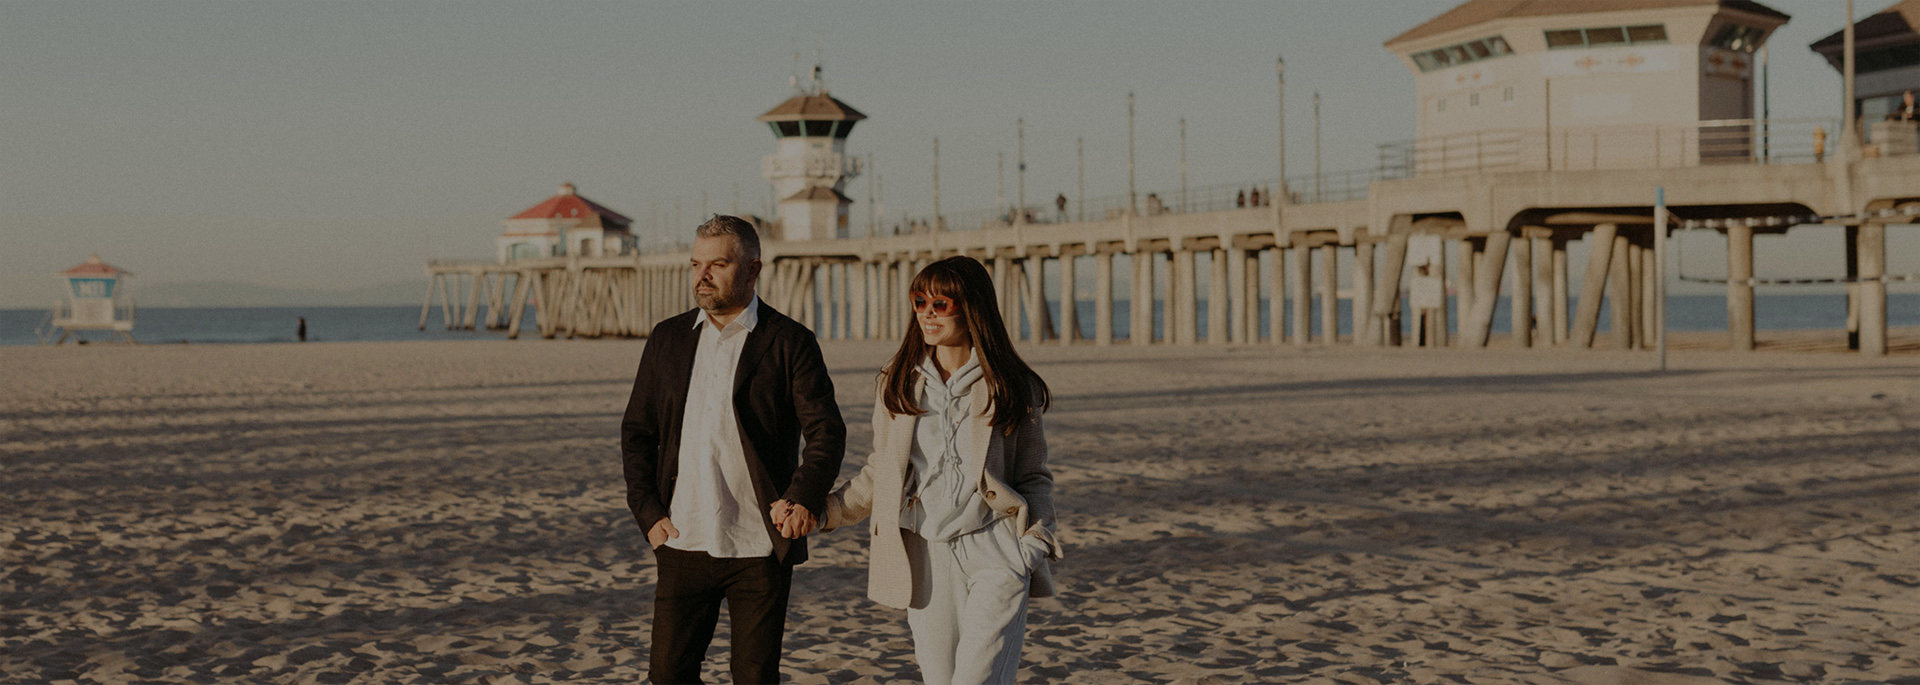 couple holding hands walking in front of fishing pier